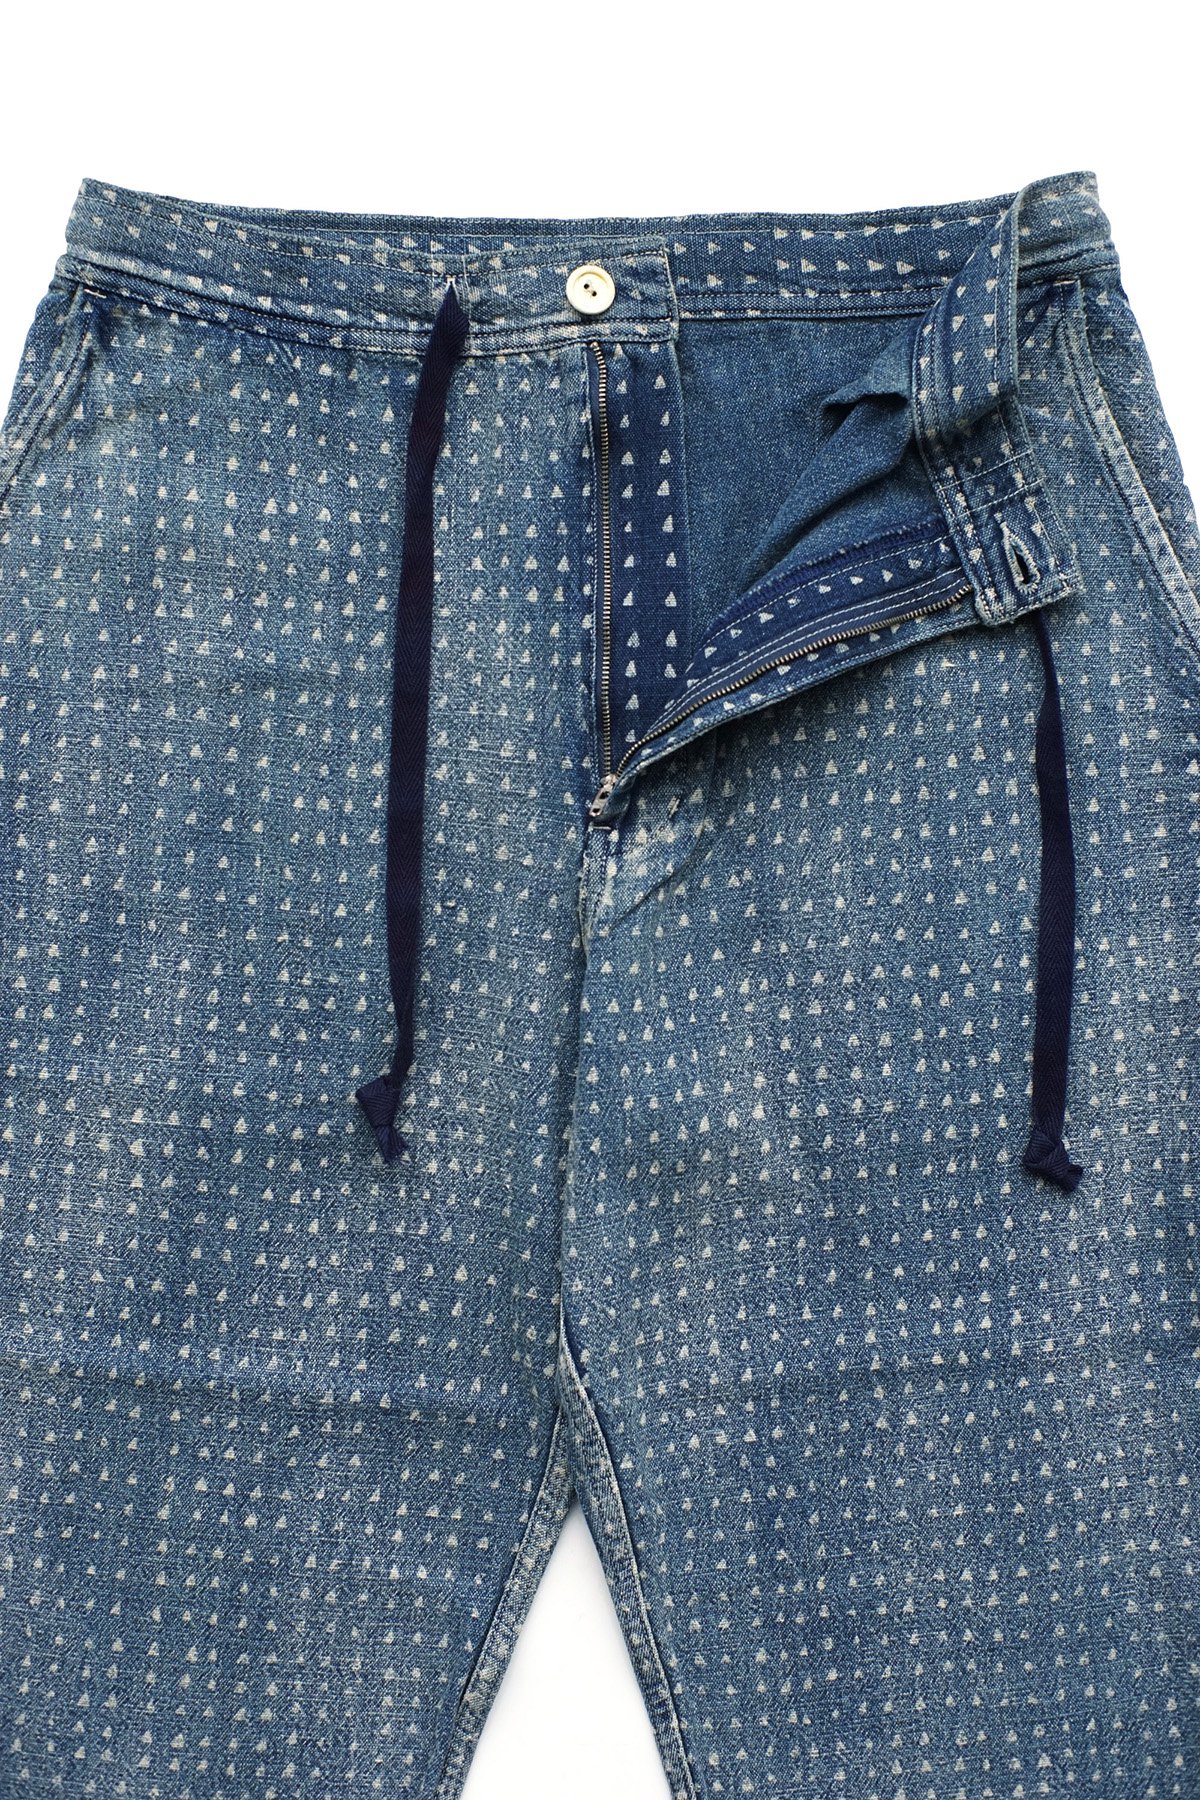 Porter Classic - AFRICAN COTTON PANTS 2019 - BLUE ポーター